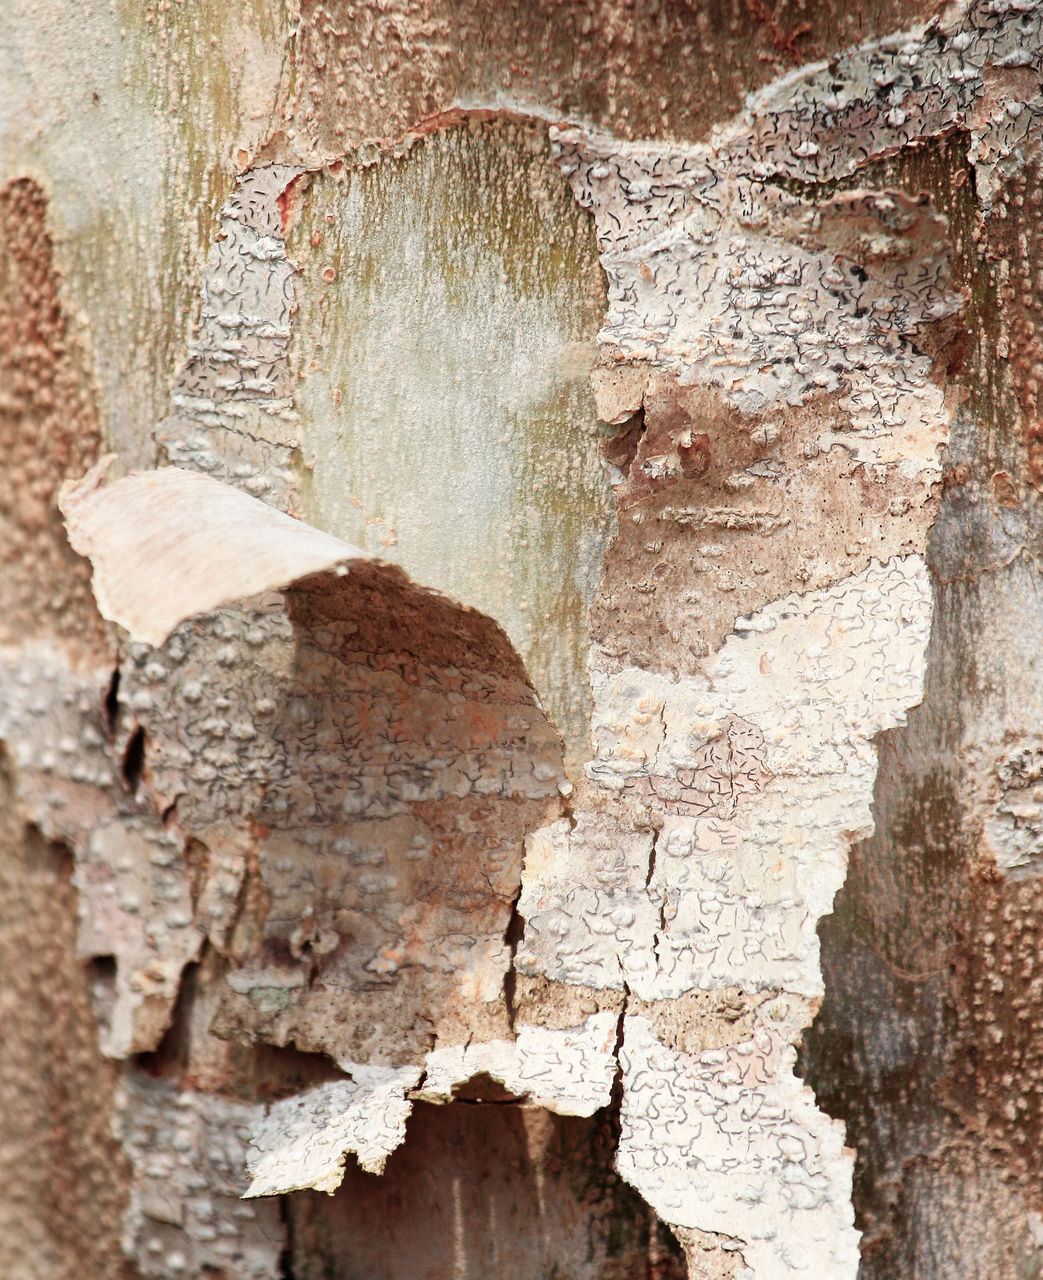 FULL FRAME SHOT OF OLD TREE TRUNK AGAINST WALL